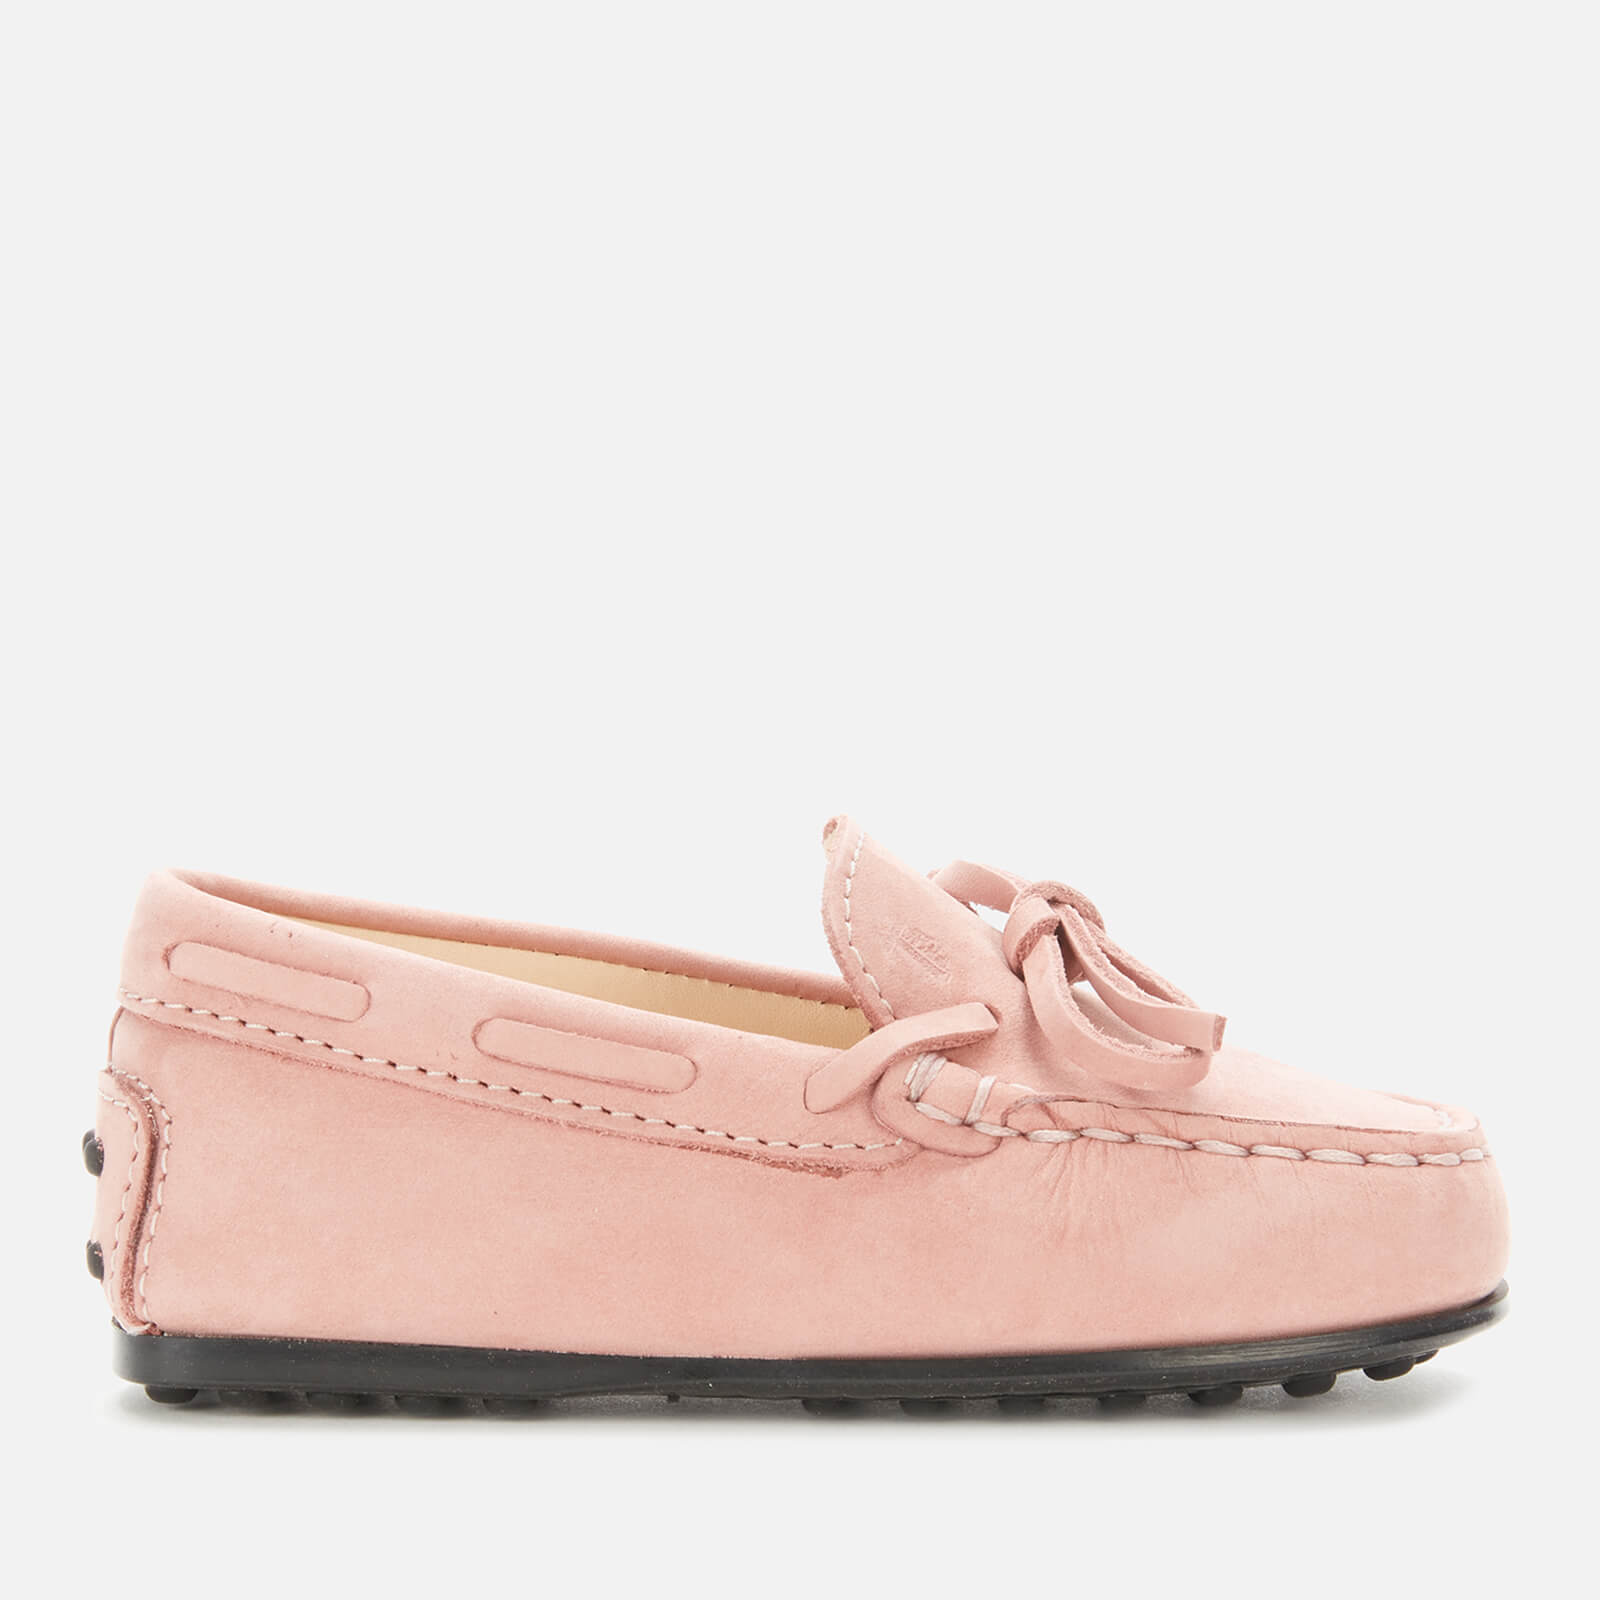 Tods Toddlers' Suede Loafers - Pink - UK 4 Baby